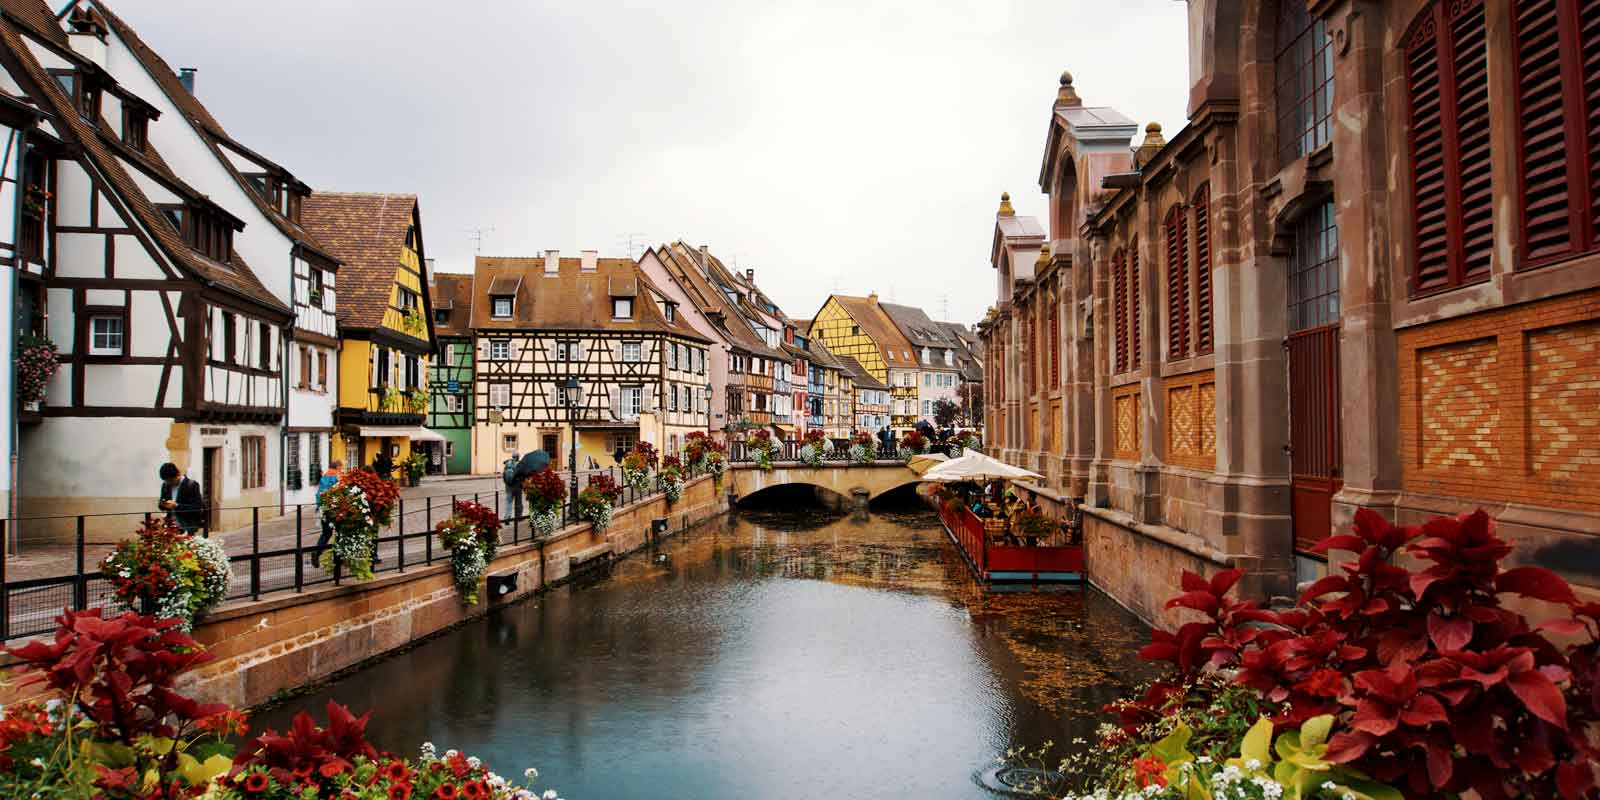 Landscape view of Colmar, France and its colorful fairytale like buildings.